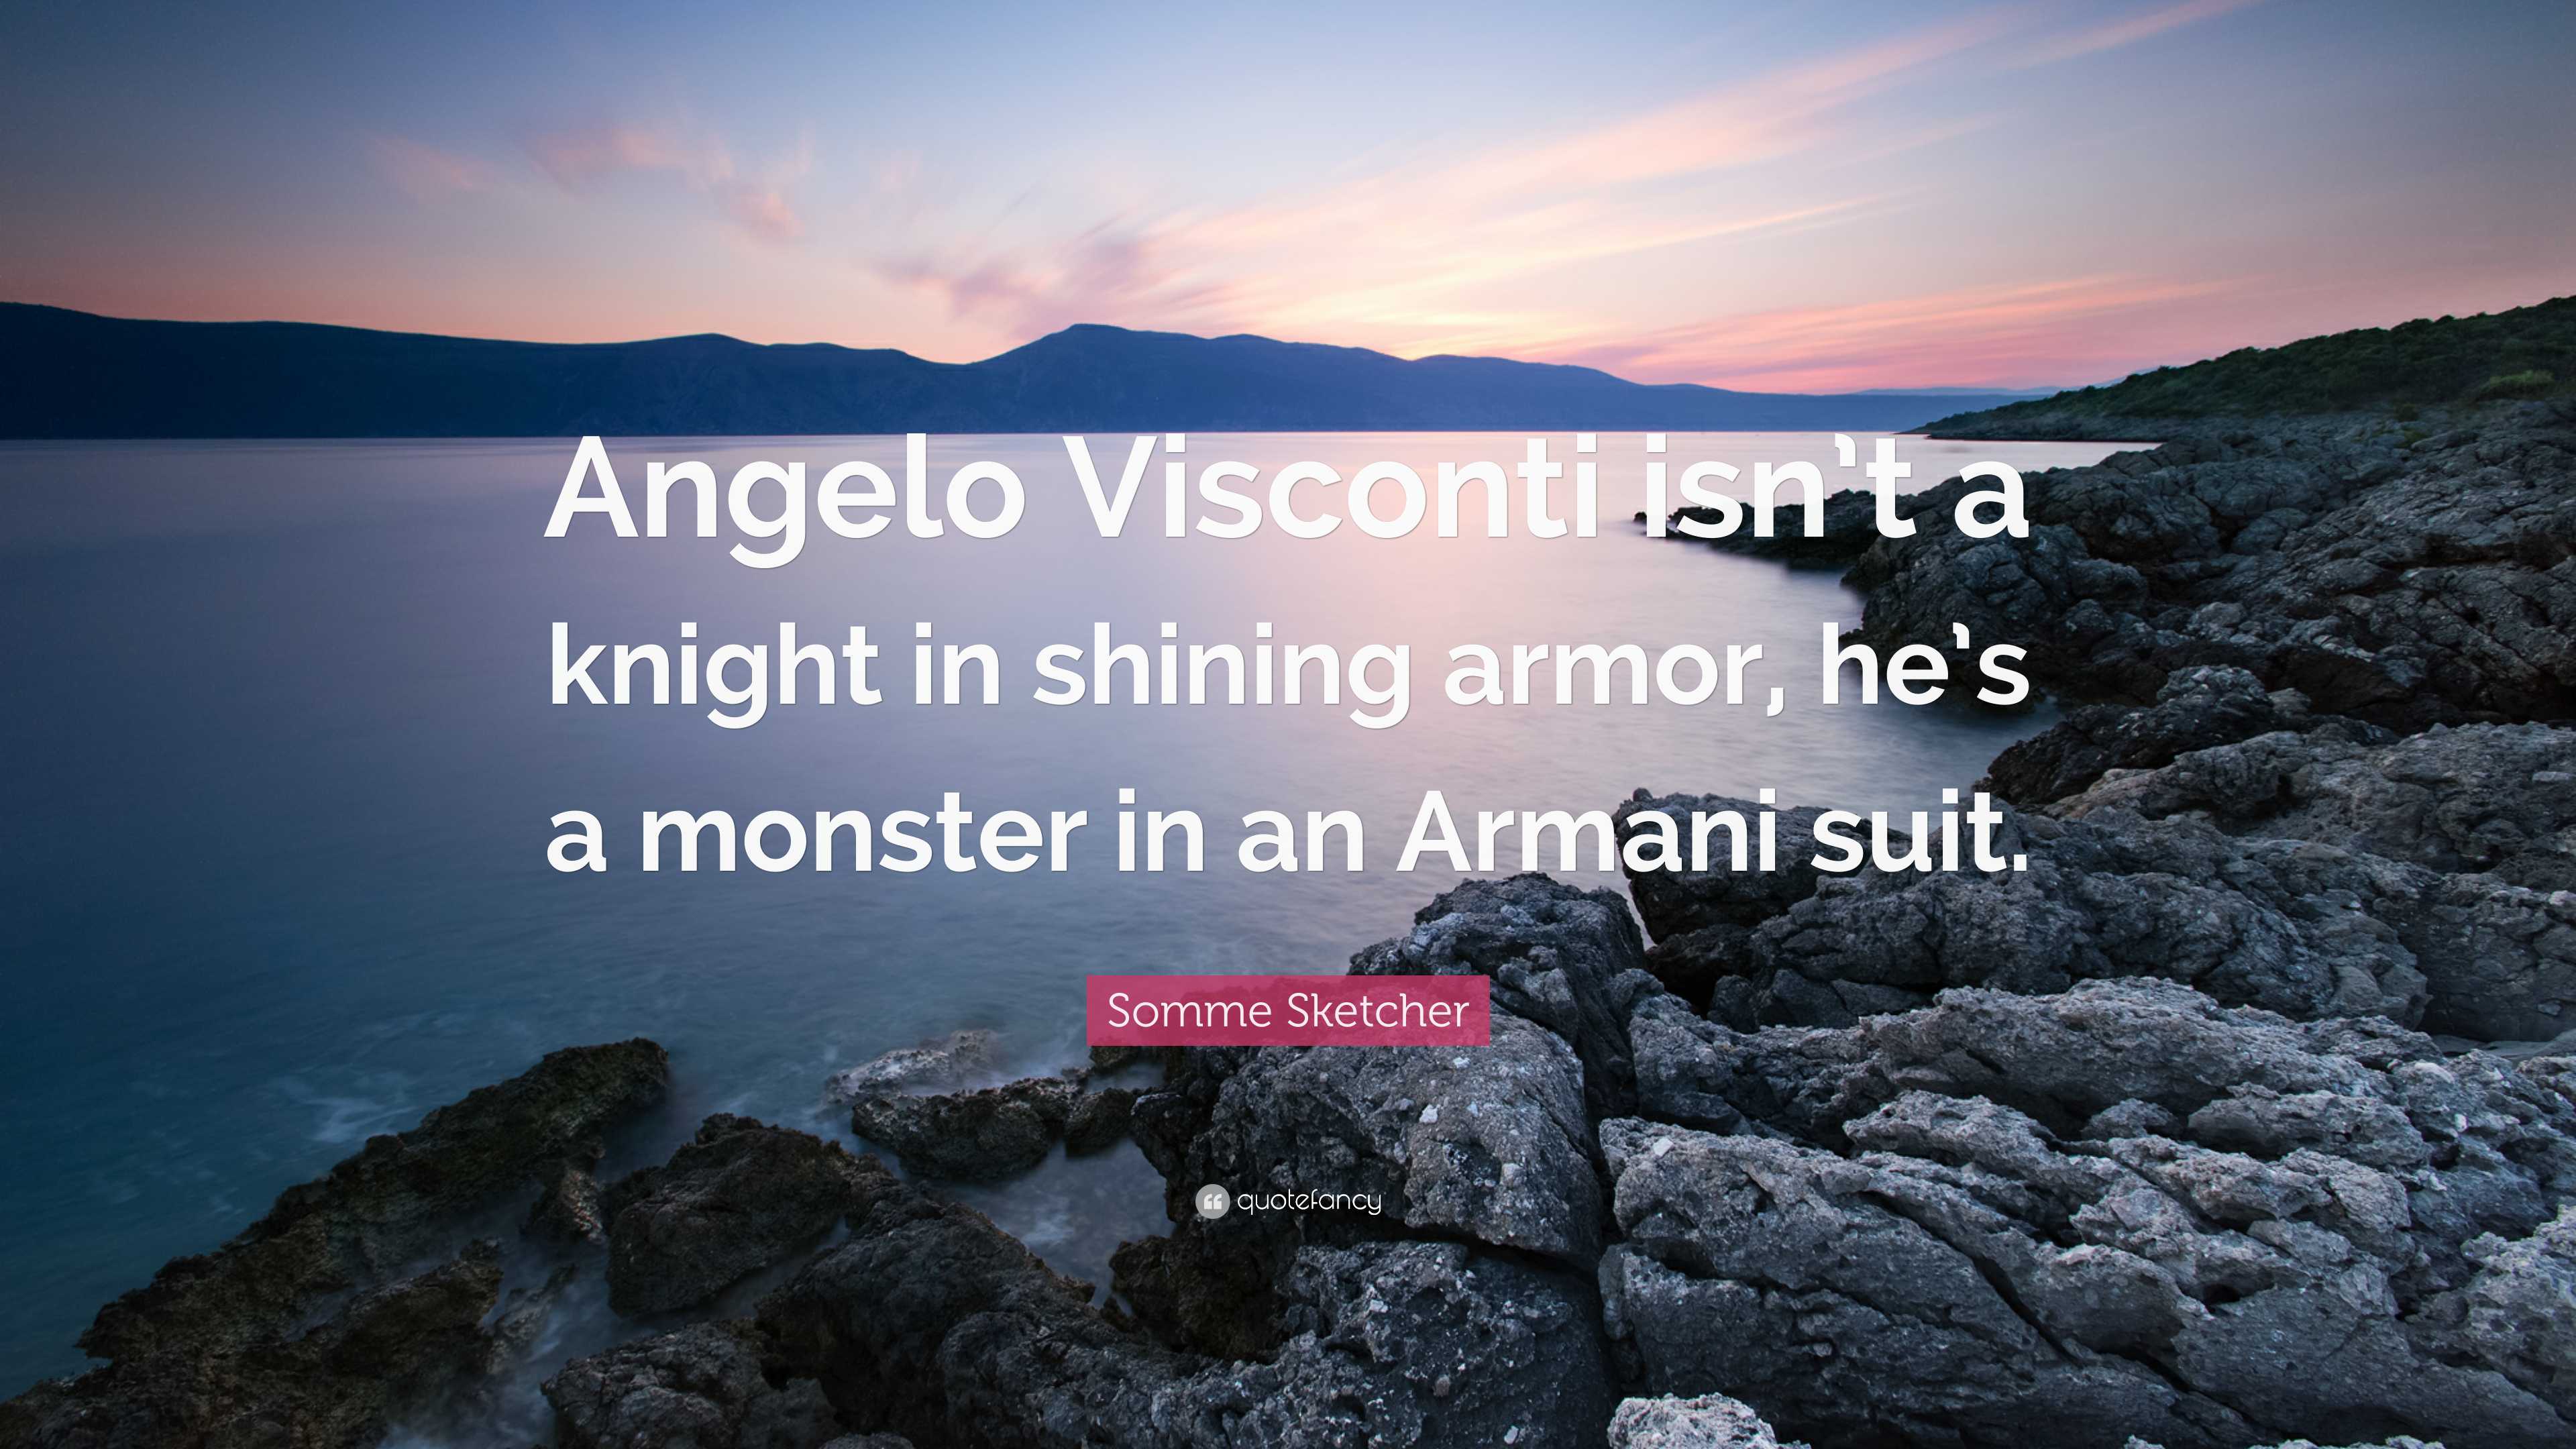 agnes macdonald recommends knight in shining armani pic